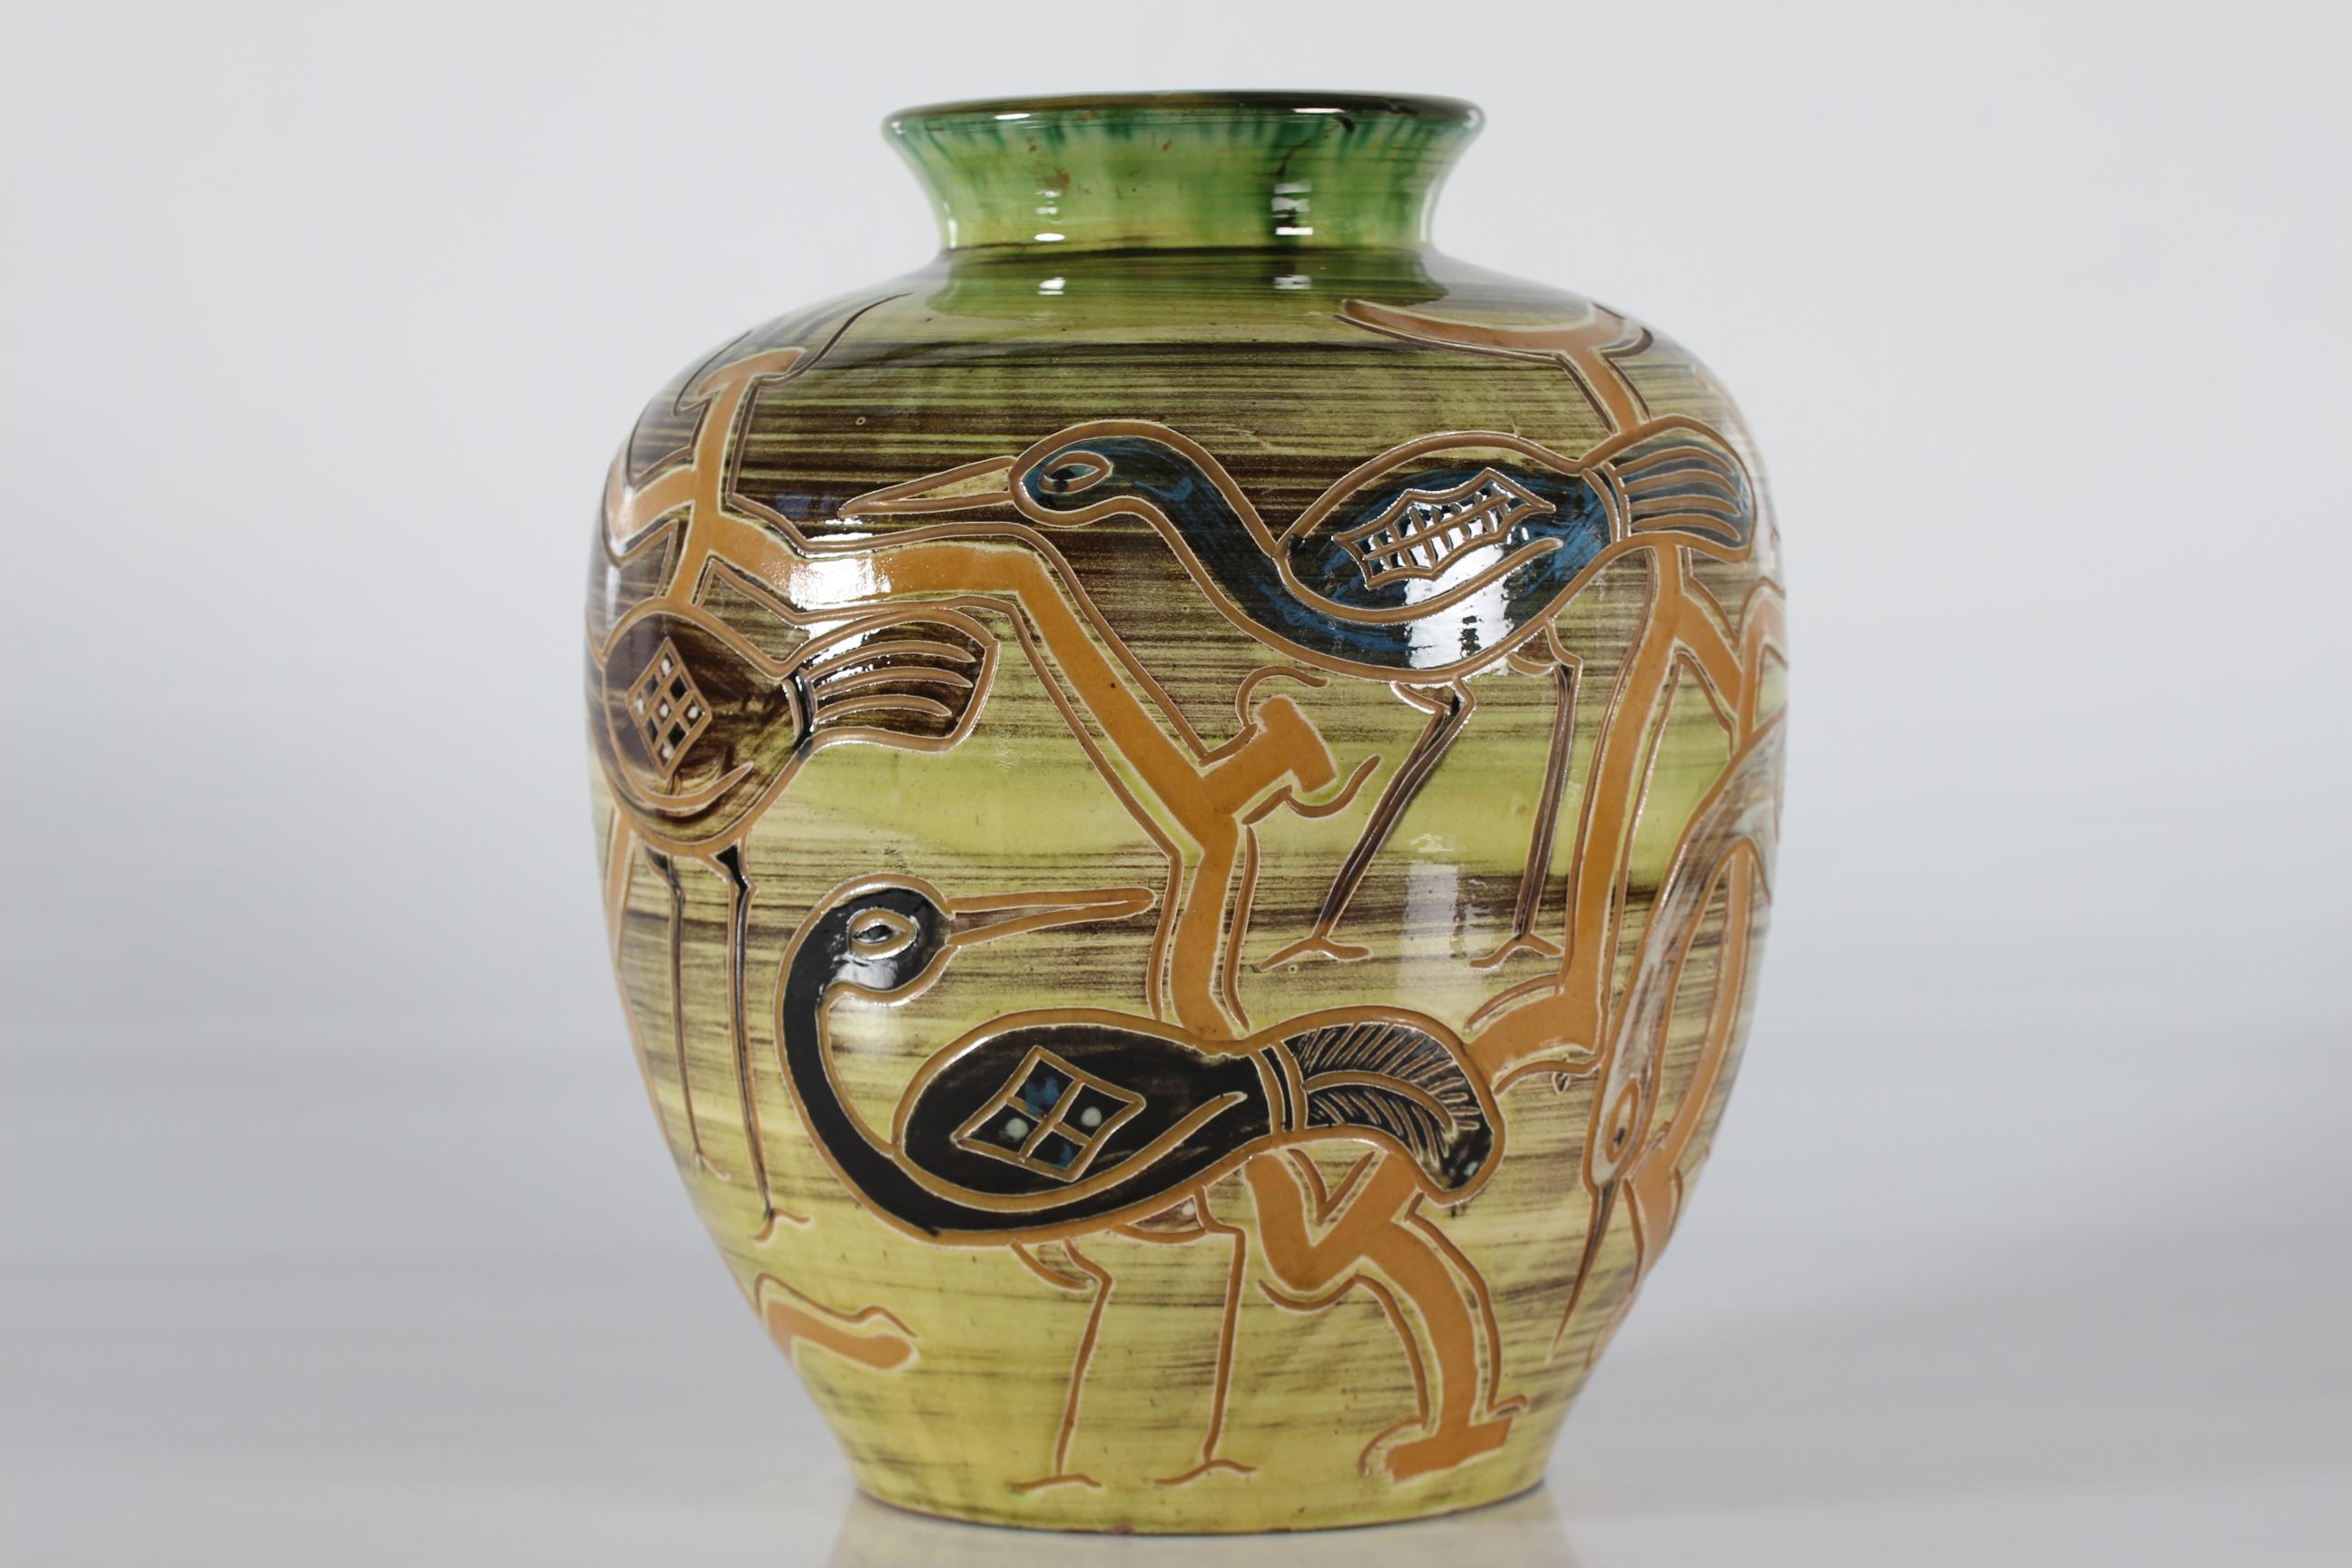 Huge and remarkable Danish ceramic floor vase designed by Harald Folmer Gross (1888-1961) made by Knabstrup Ceramics. 
H. F. Gross worked for Knabstrup in the period 1941 to 1945.

The multi colored vase has different kinds of spectacular birds